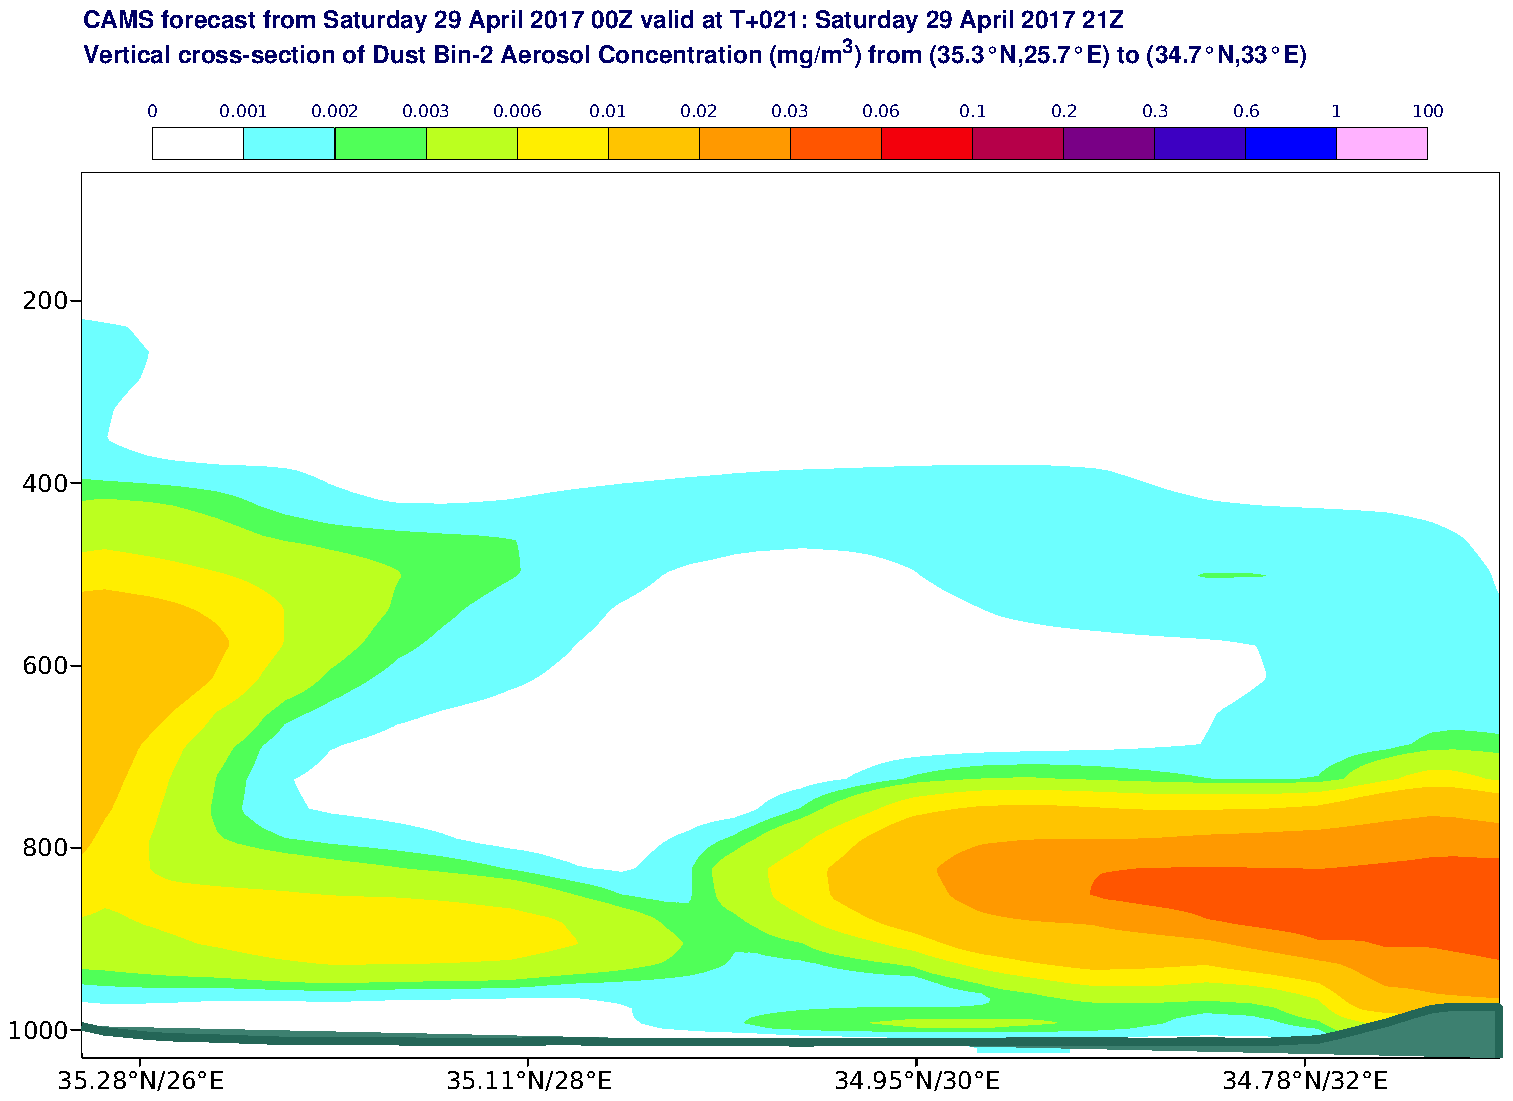 Vertical cross-section of Dust Bin-2 Aerosol Concentration (mg/m3) valid at T21 - 2017-04-29 21:00